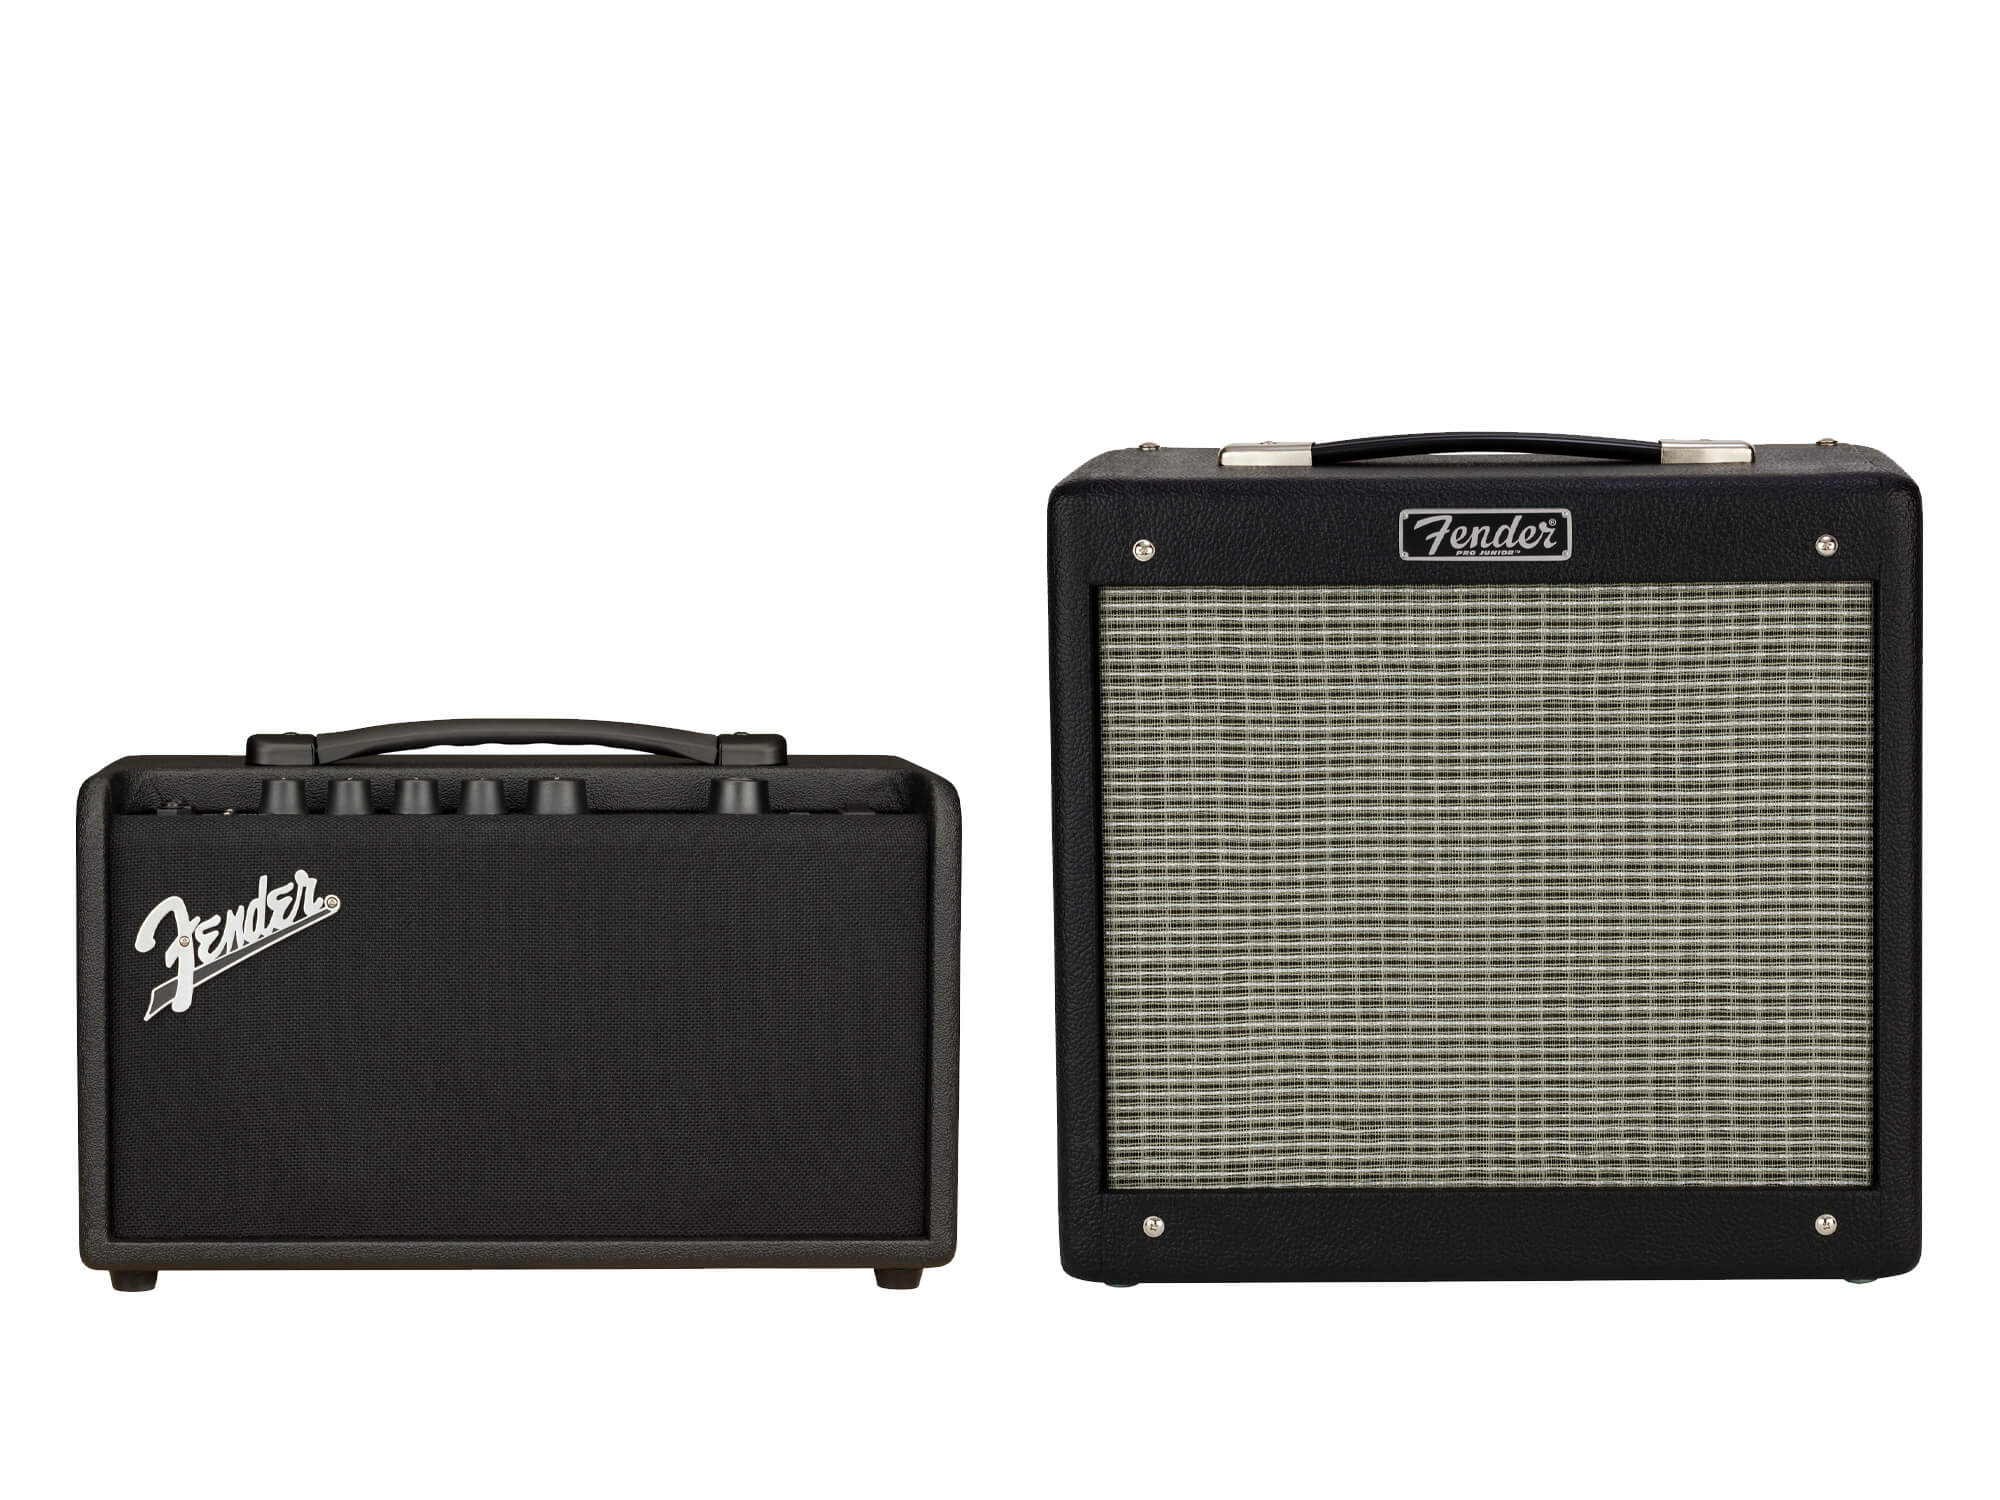 Fender introduces the Mustang LT40S desktop amp and a special Pro